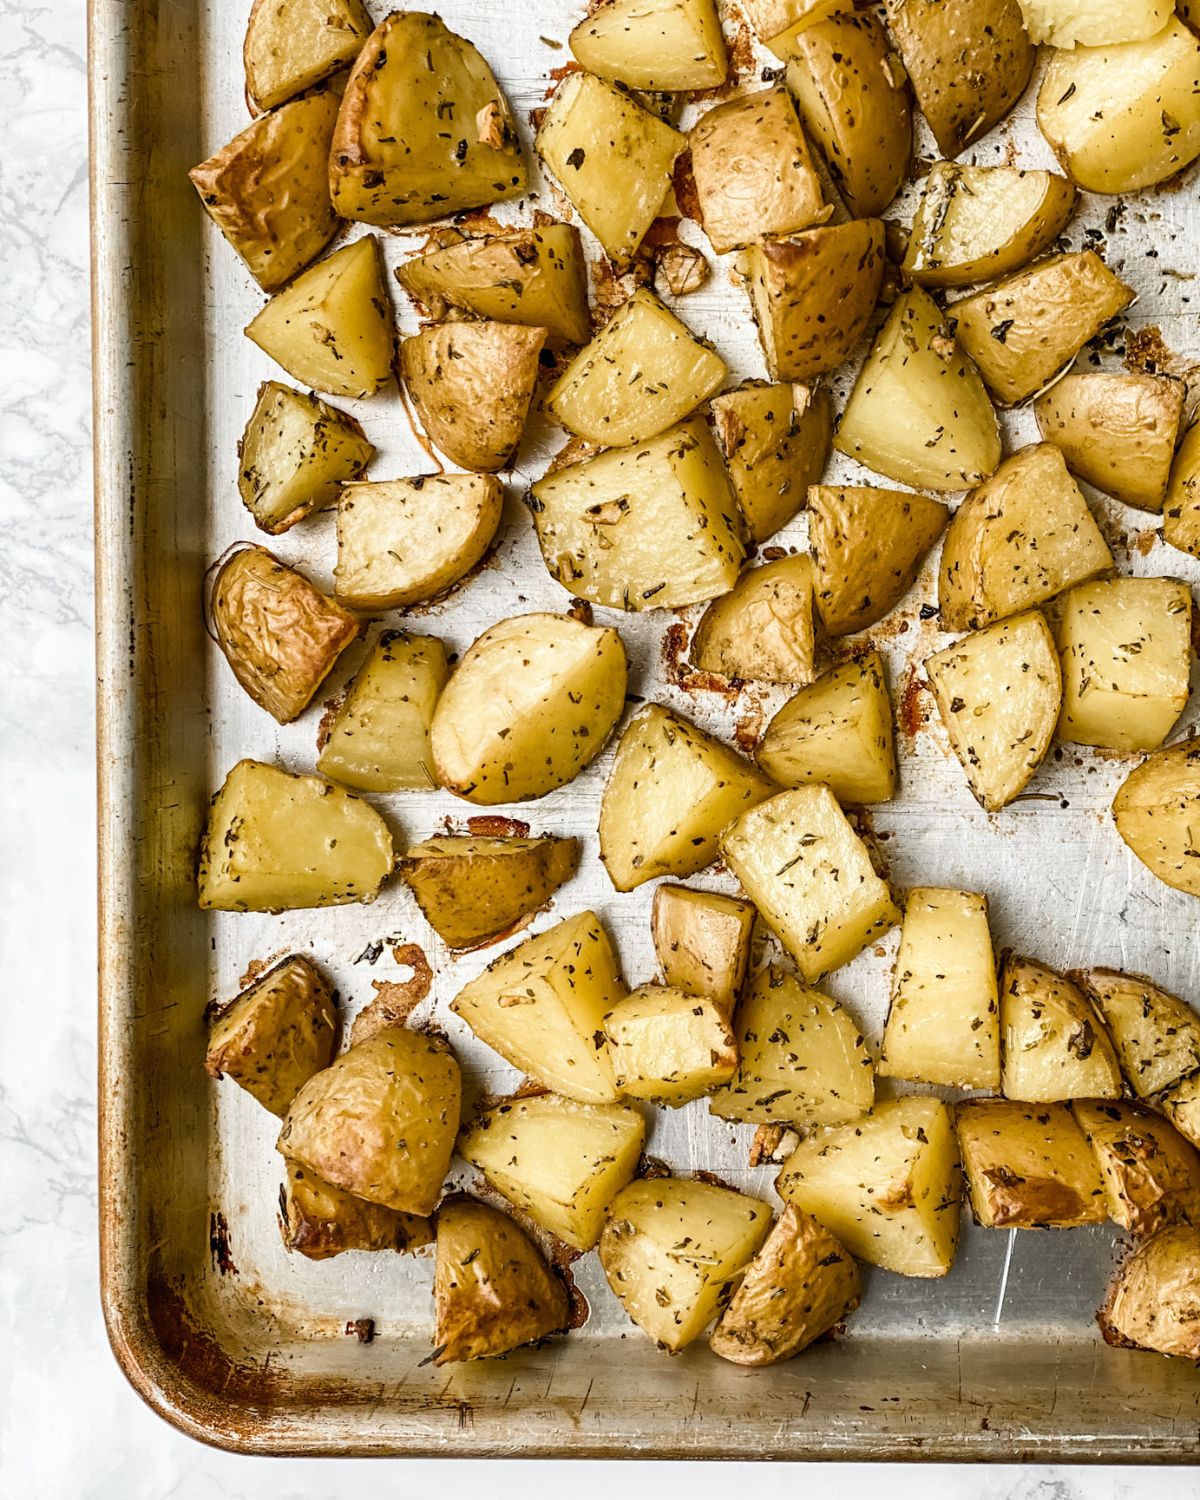 Overhead picture of roasted potatoes on a sheet pan.